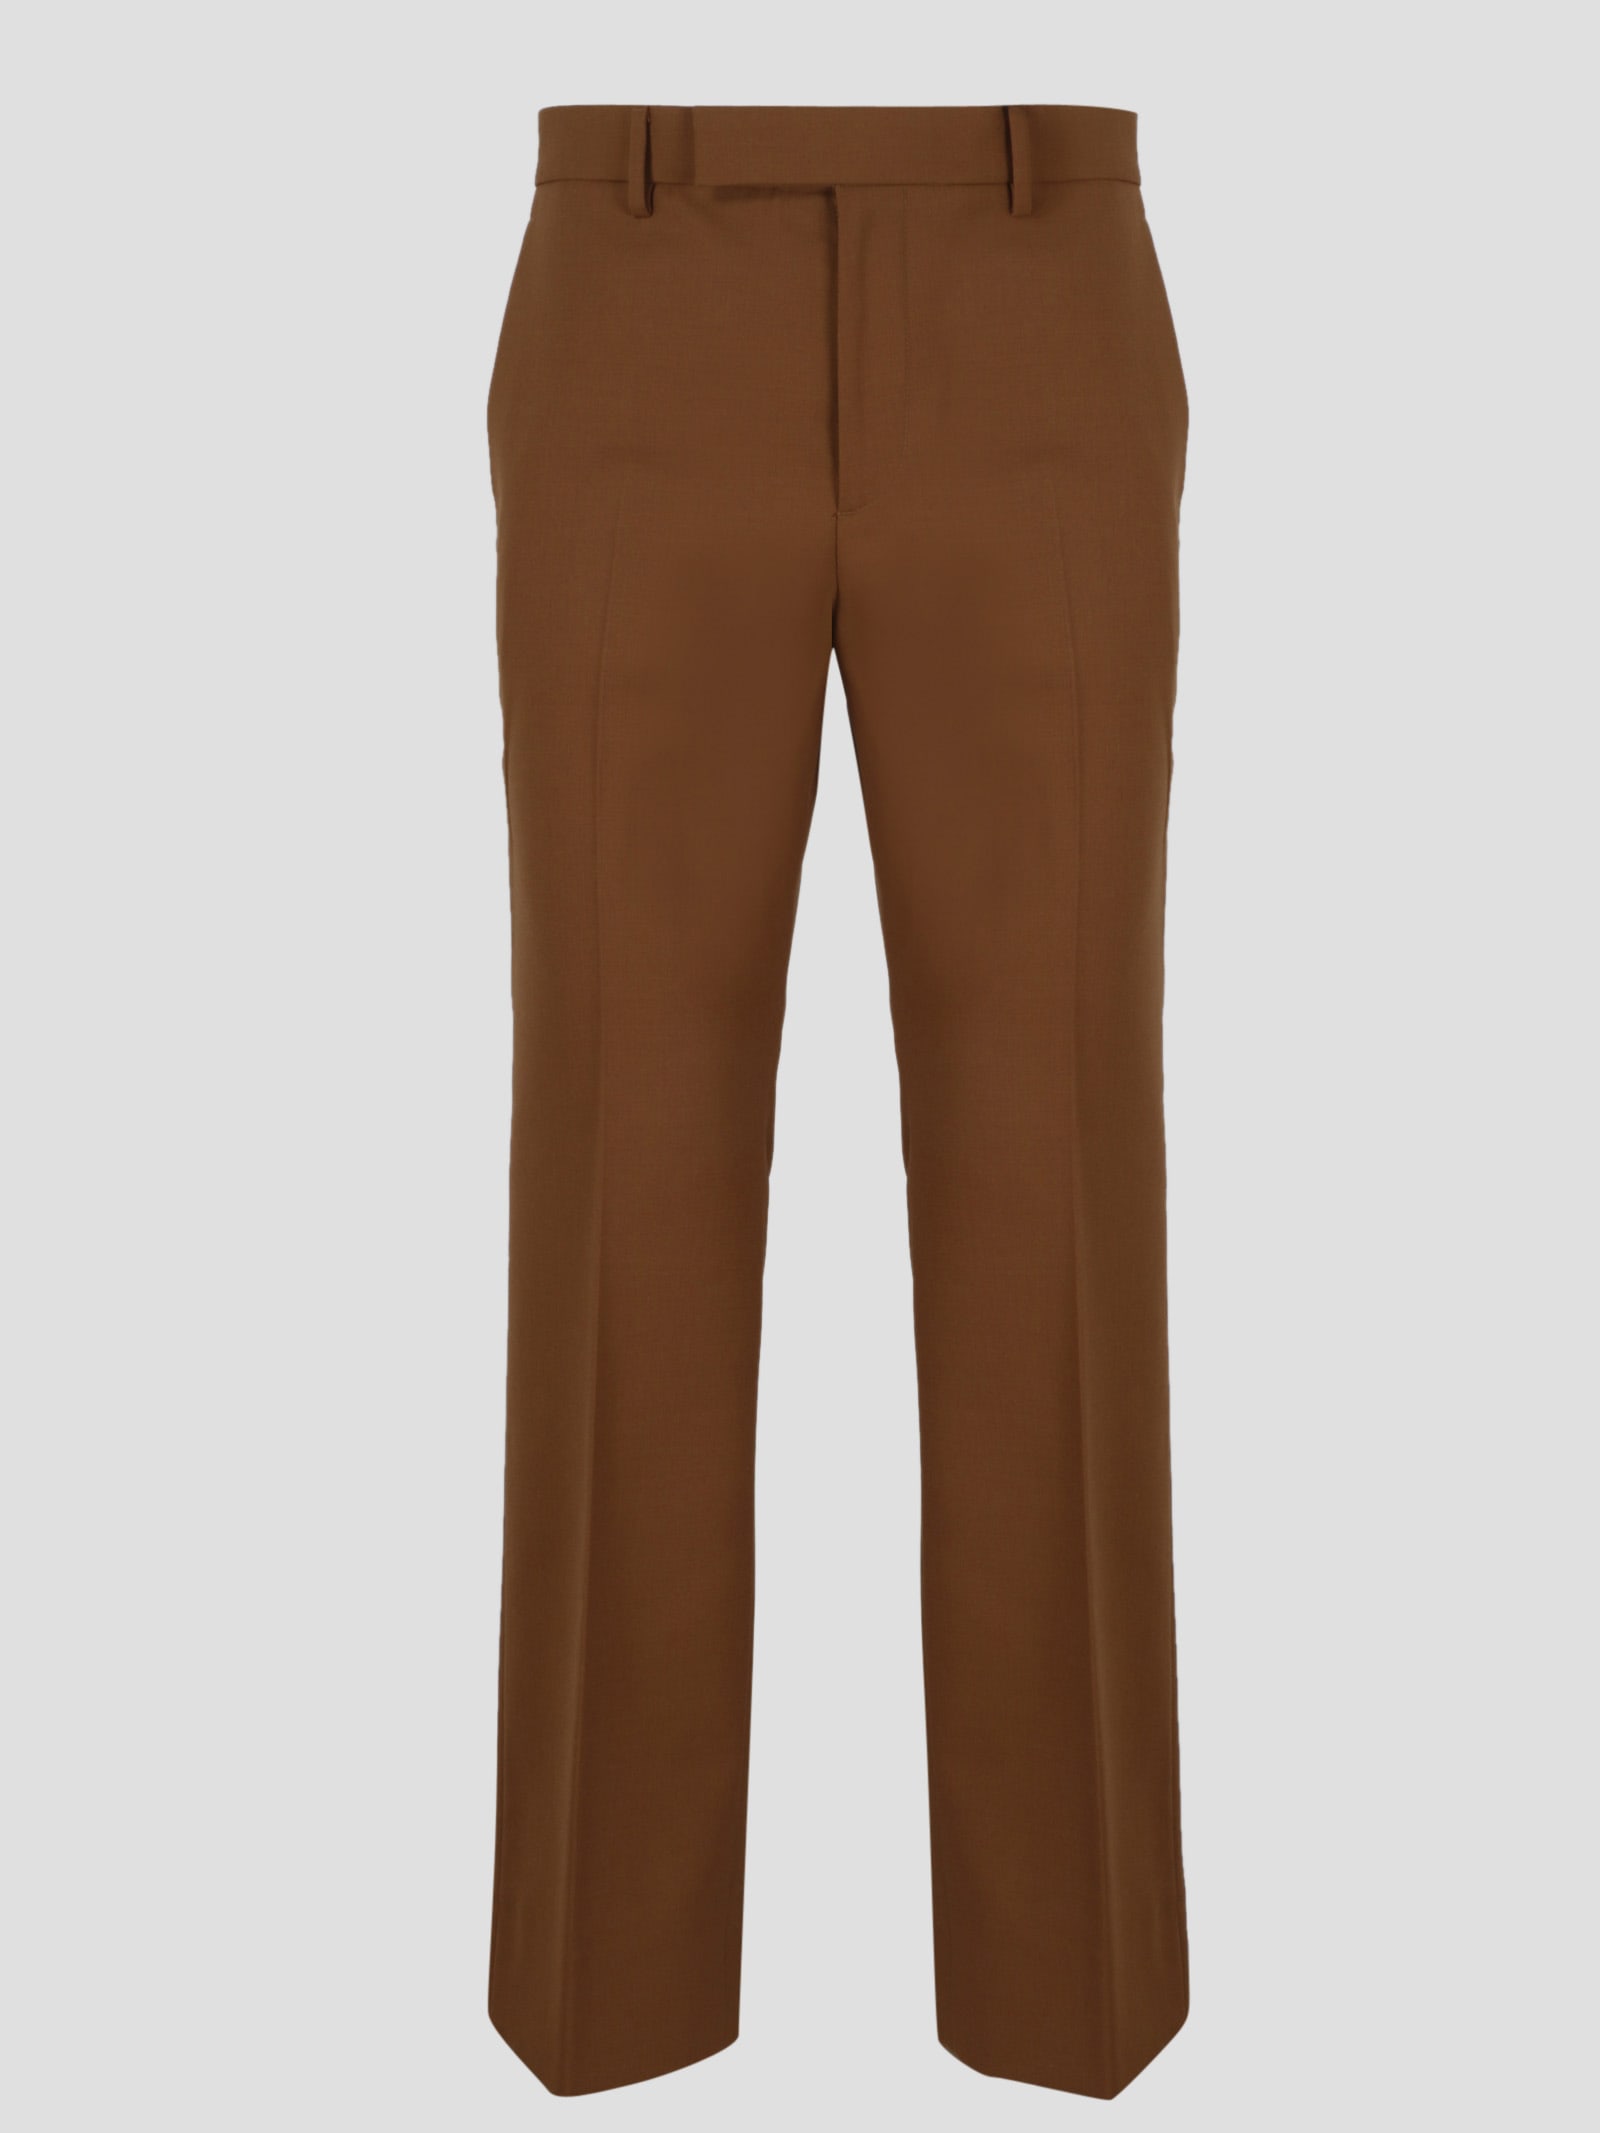 Gucci 70s Style Trousers